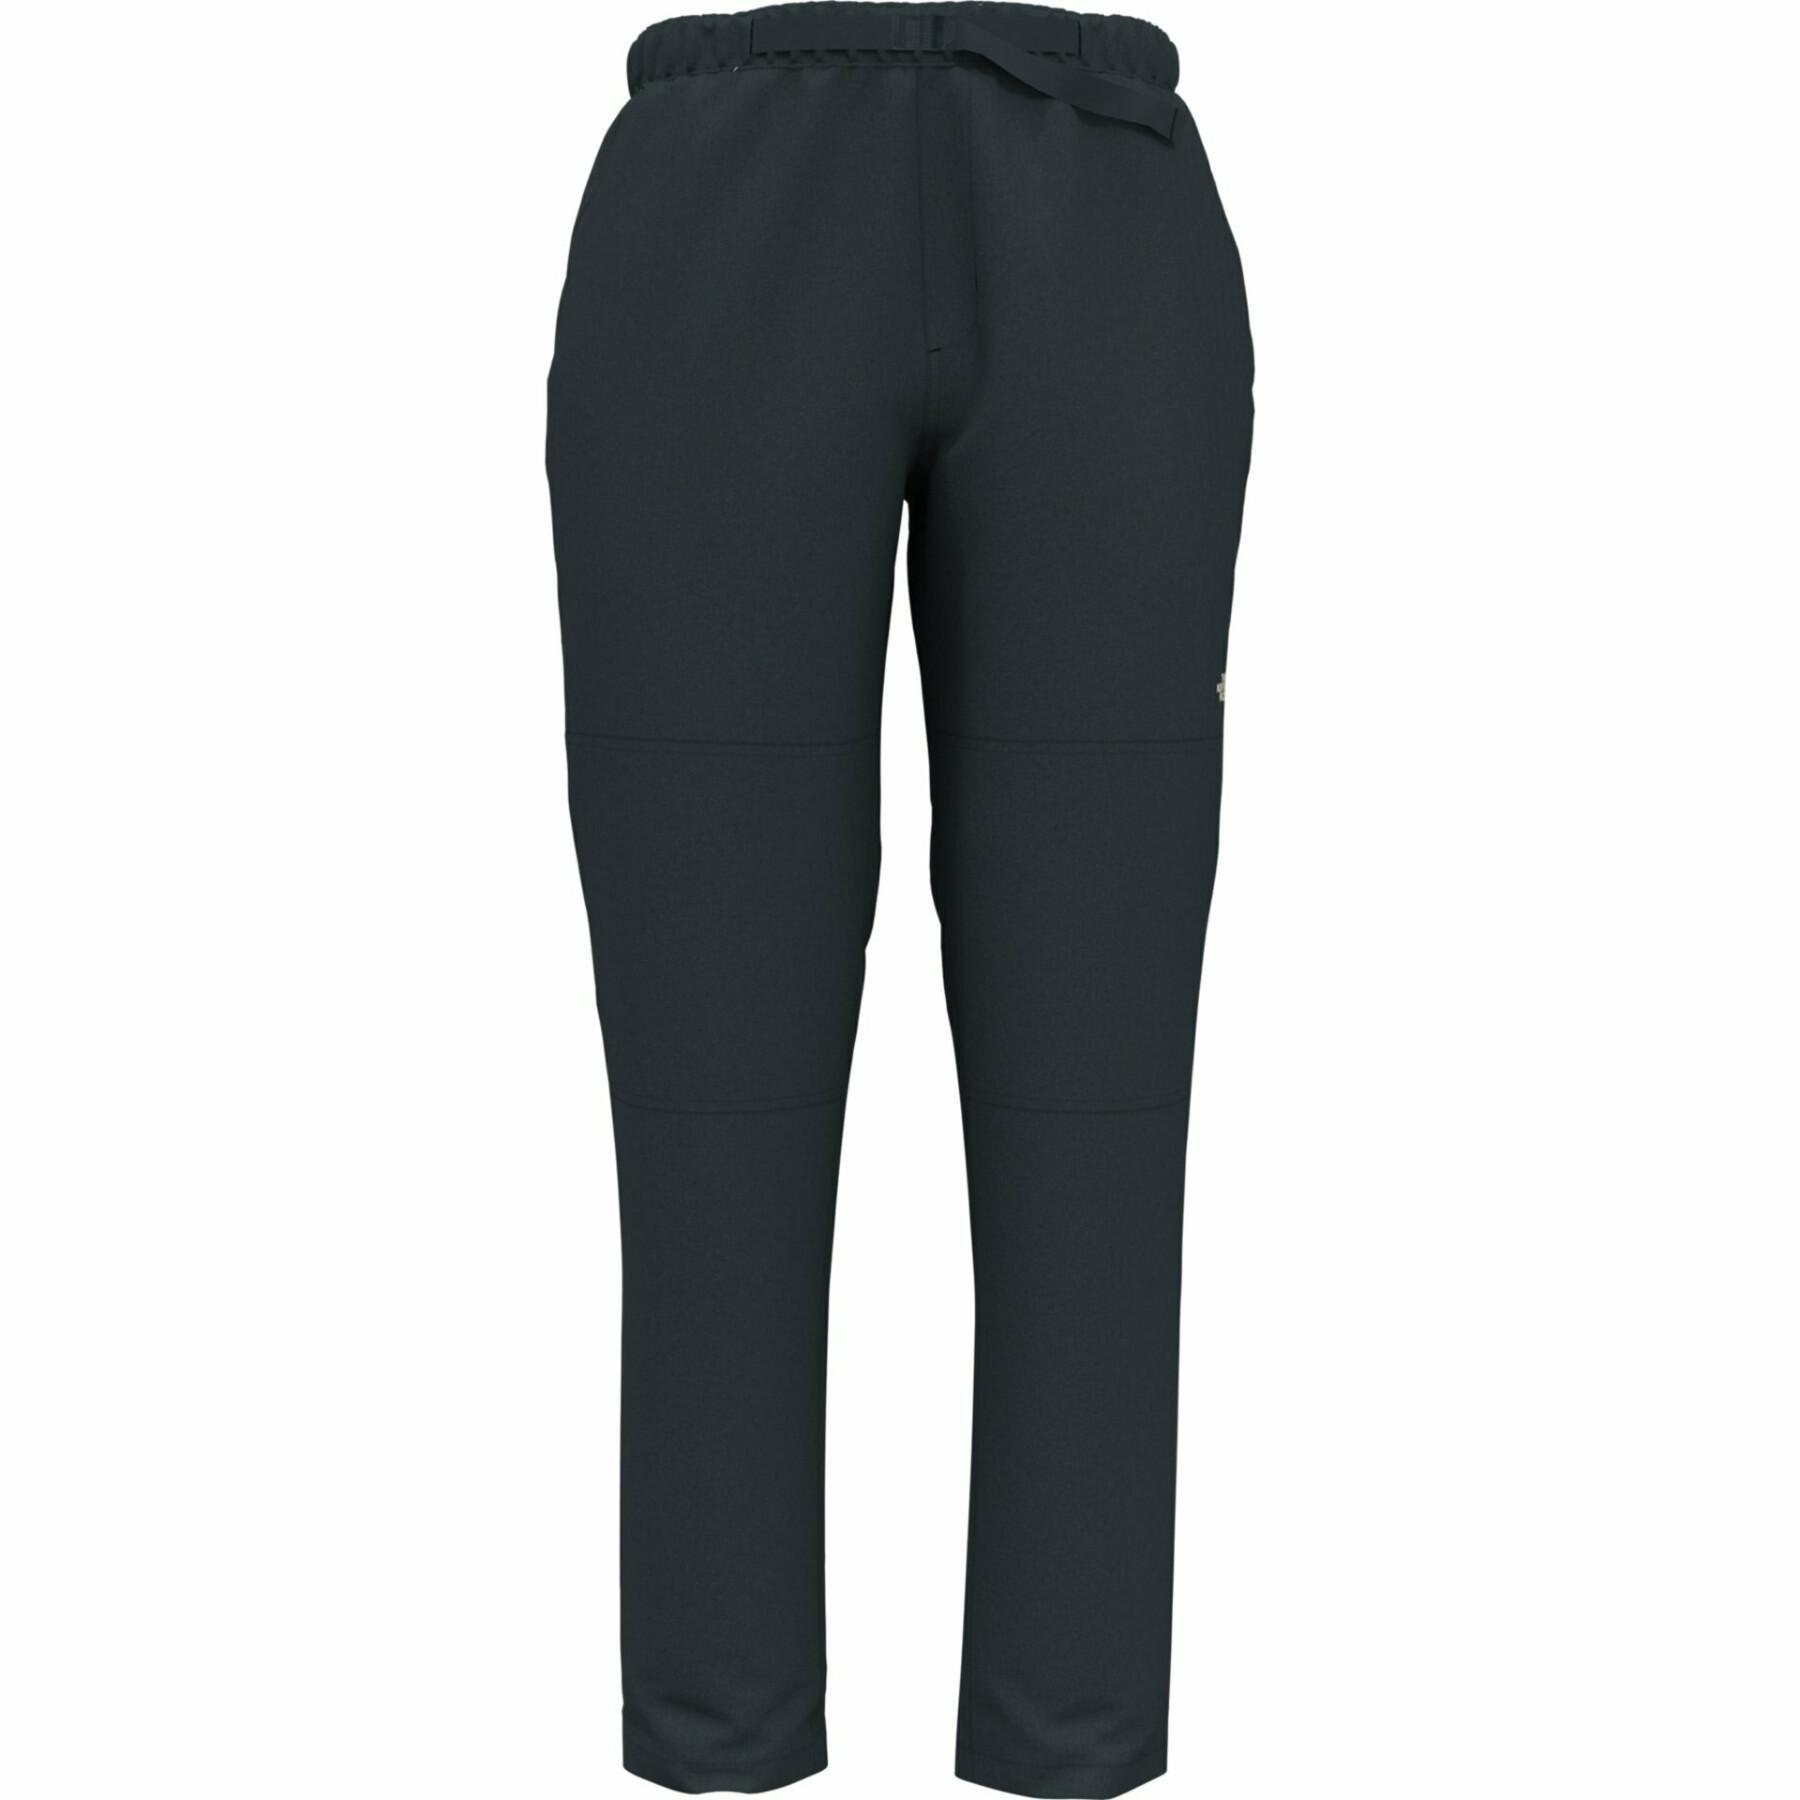 Broek The North Face Class V Belted